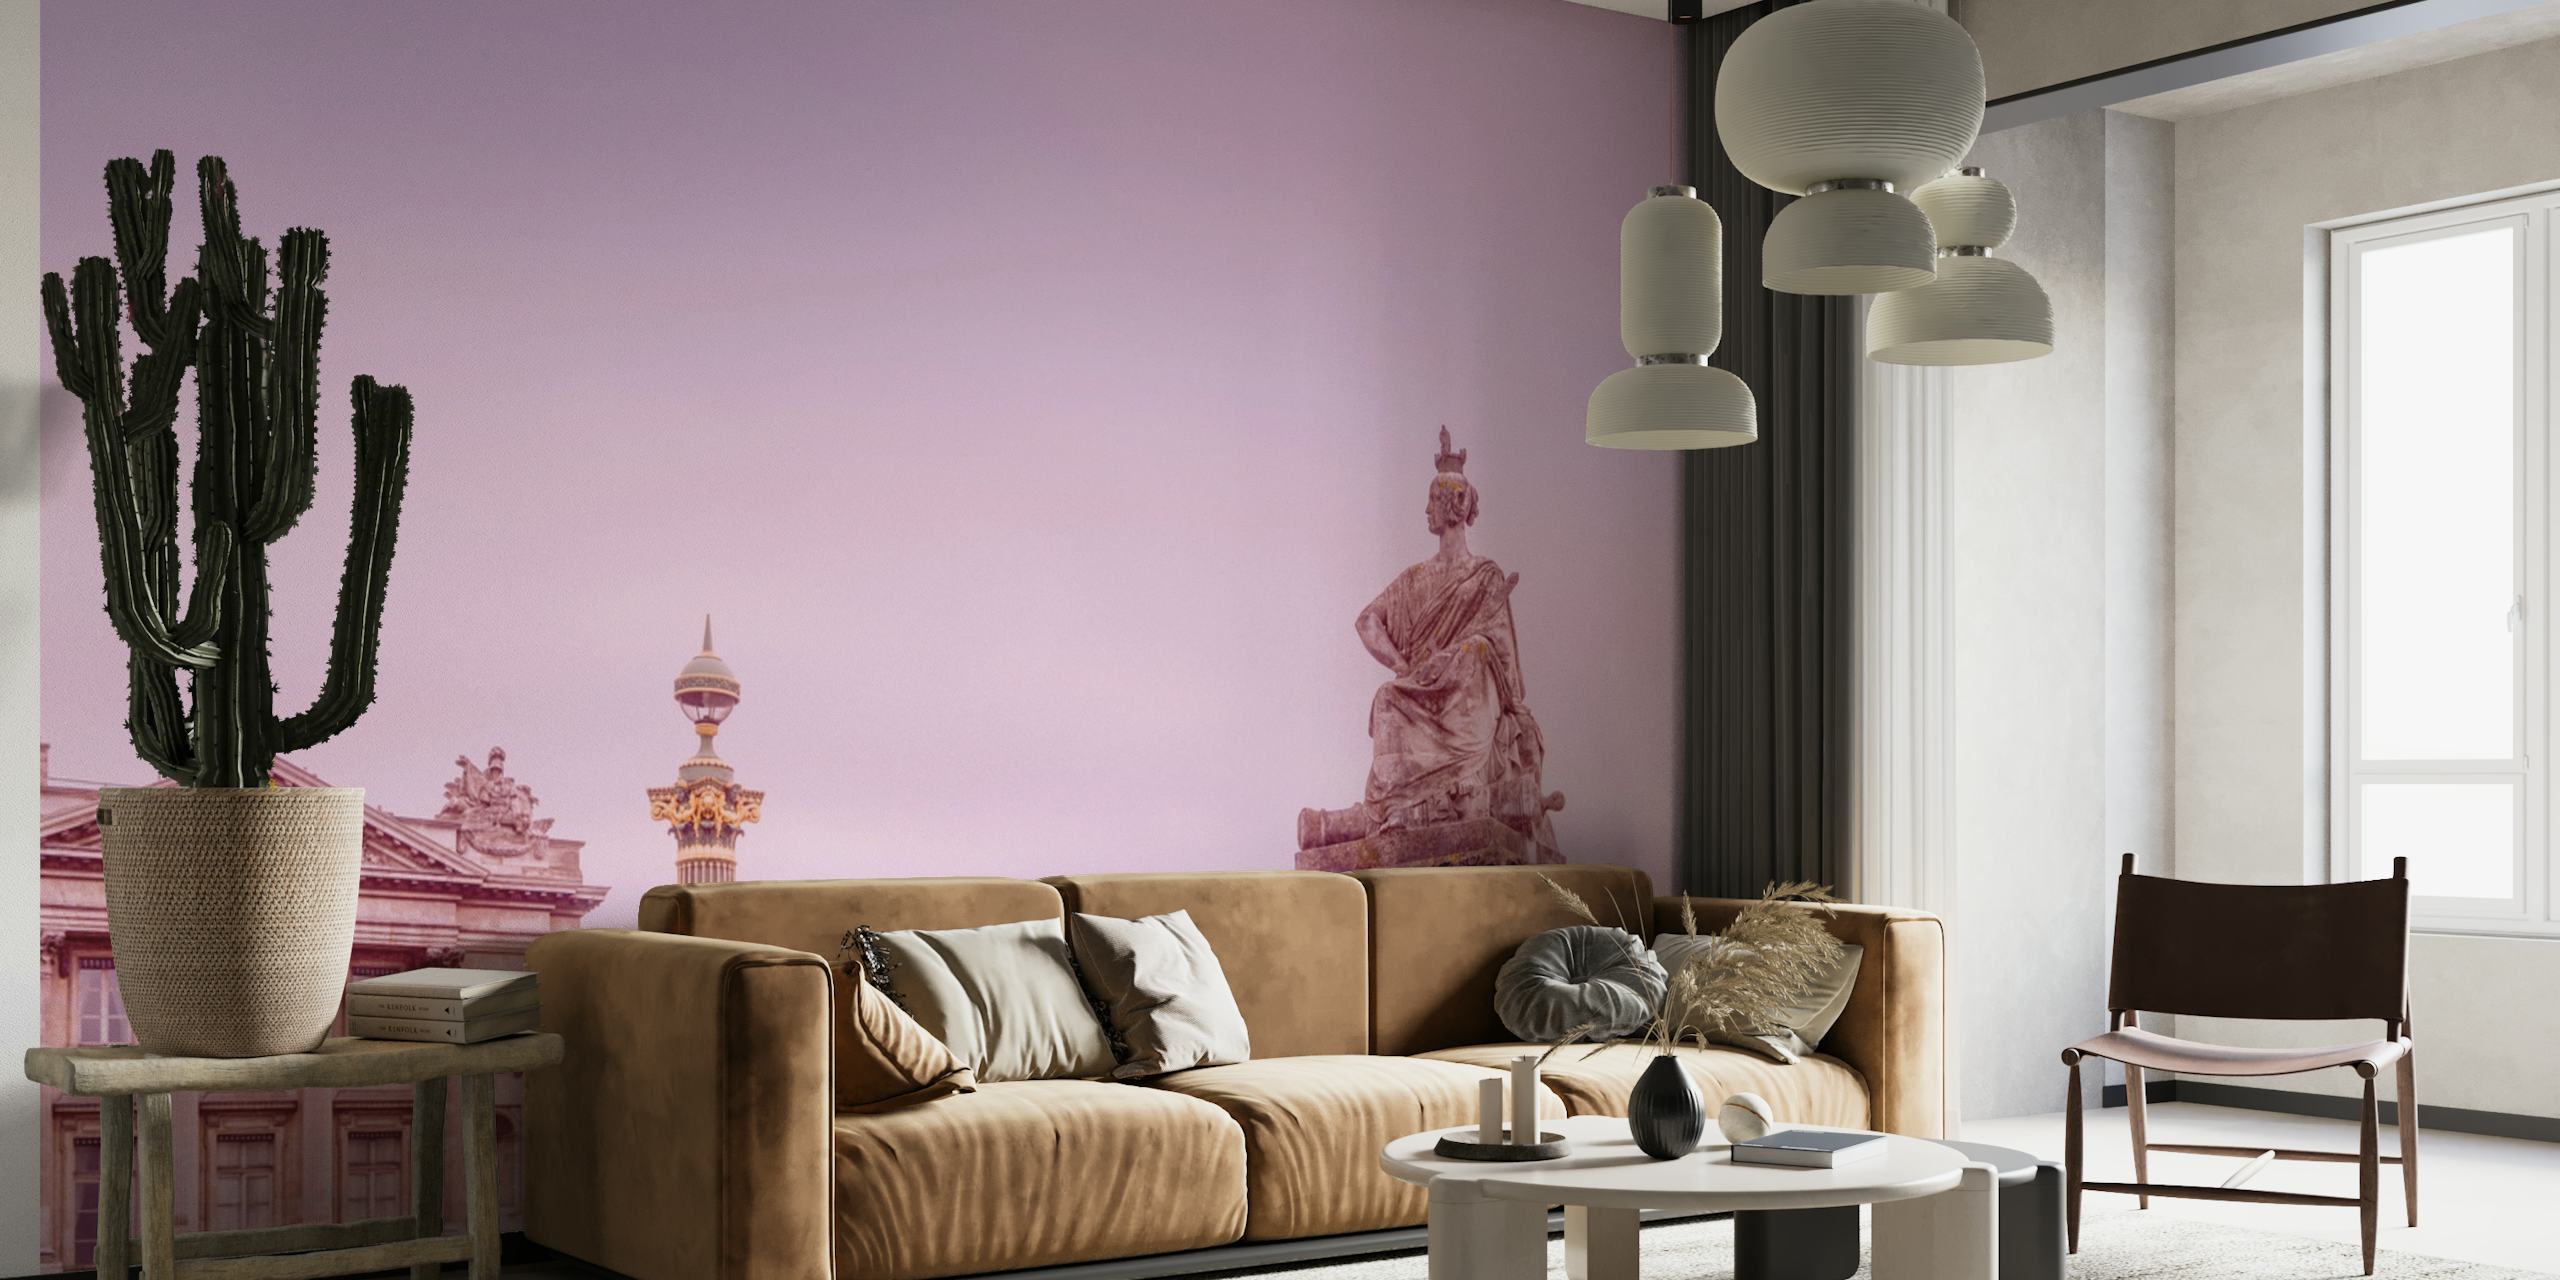 Purple tinted Paris skyline wall mural with iconic architecture